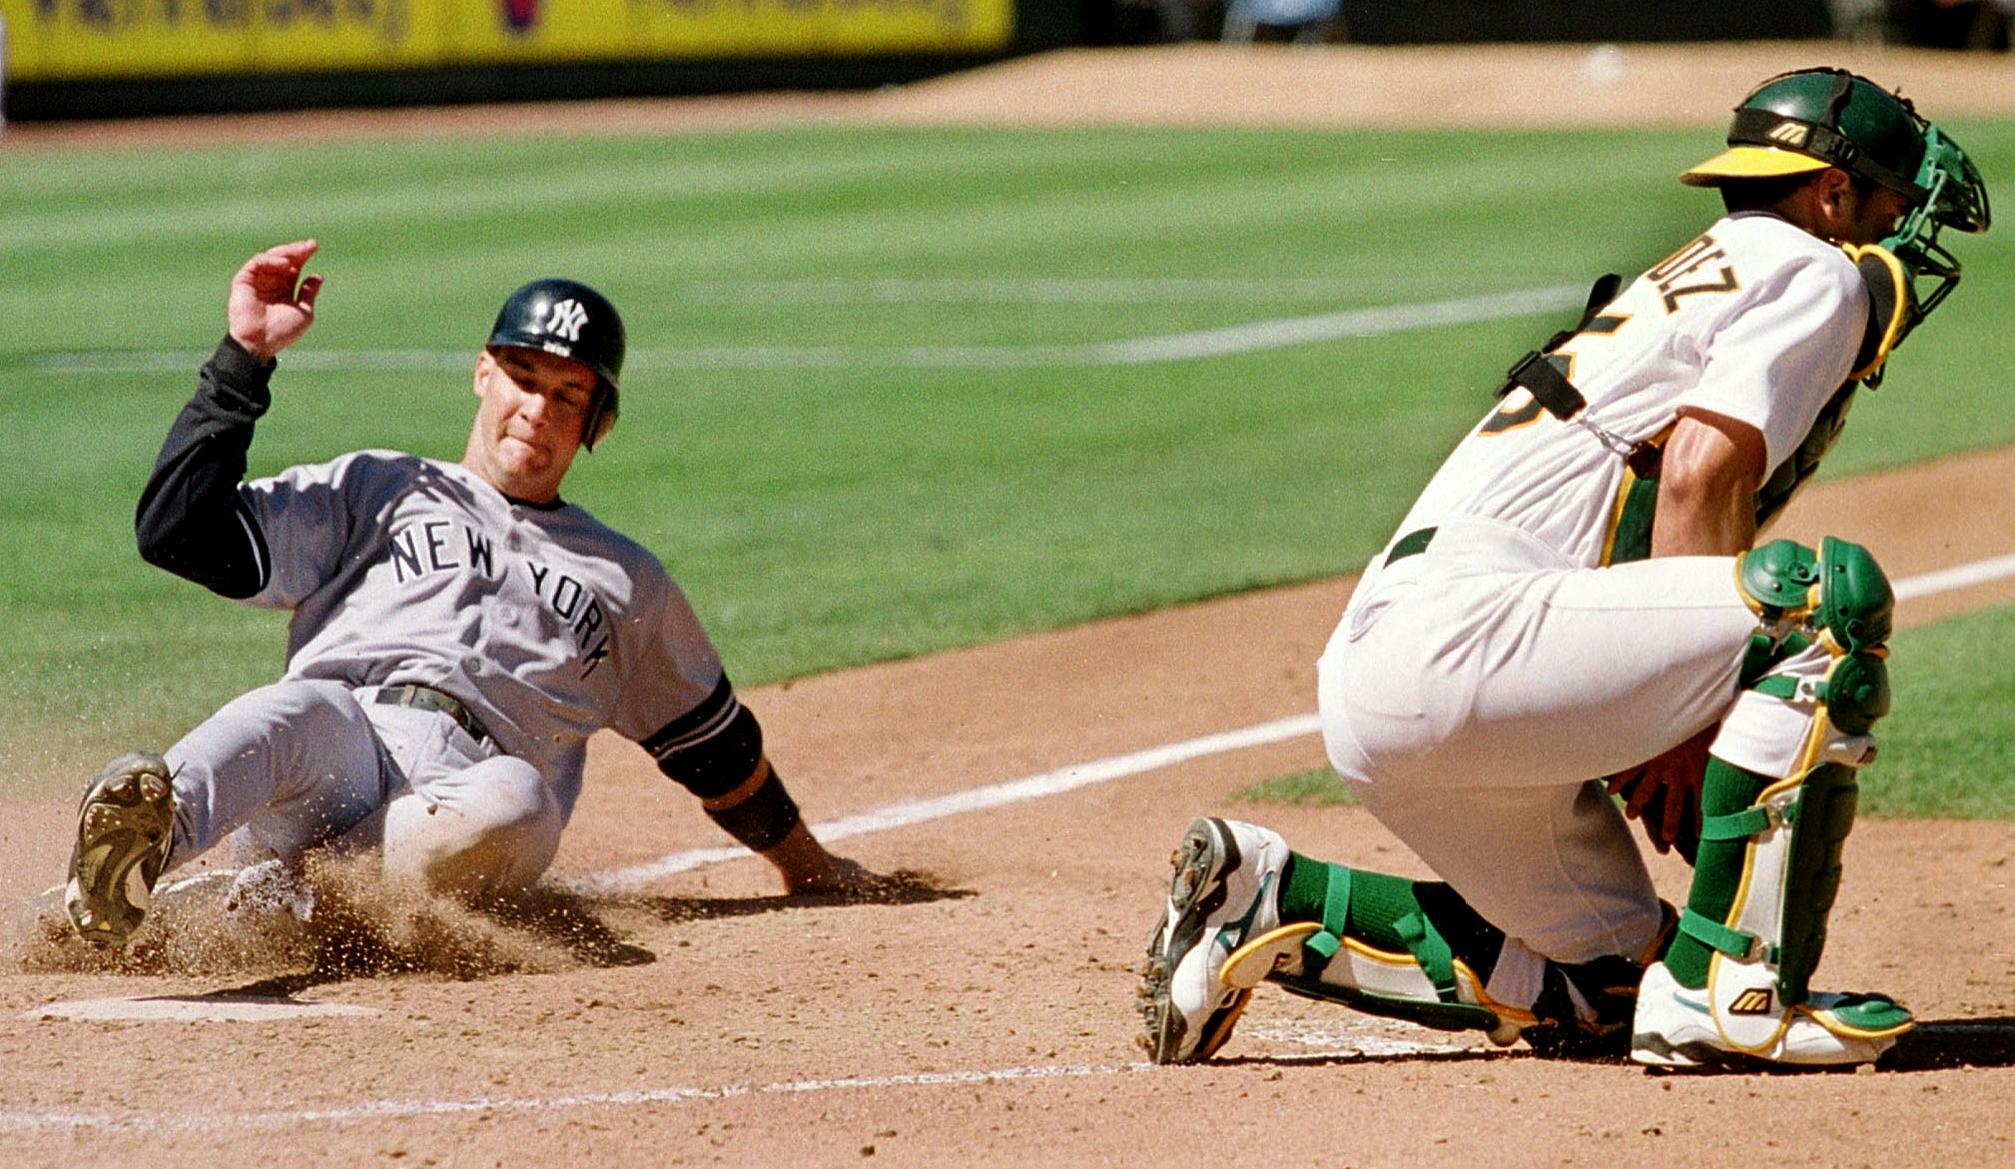 OAKLAND, UNITED STATES:  New York Yankees Clay Bellinger (L) slides safely into home plate, beating the tag from Oakland Athletics catcher Ramon Hernandez (R) during the fifth inning in Oakland, California, 26 August 2000. The Yankees defeated the A's 10-